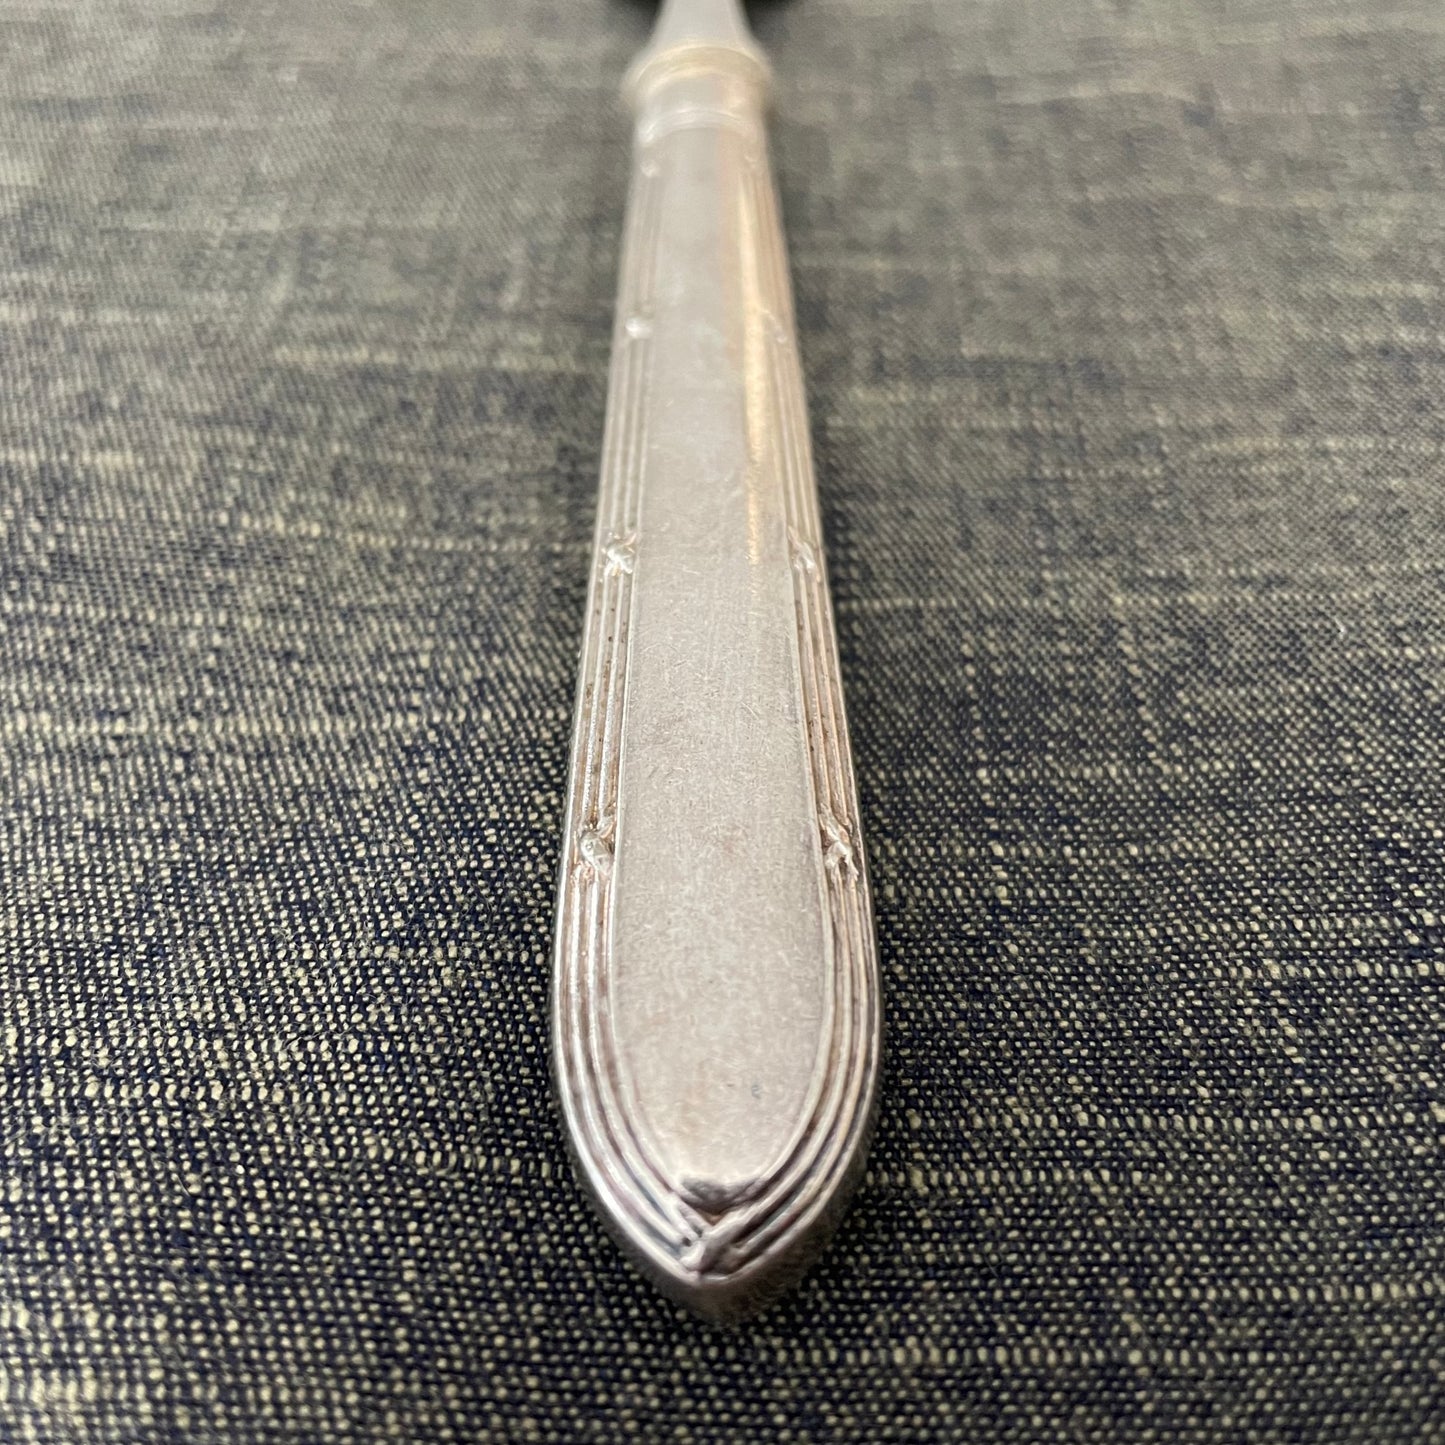 antique silver condiment server fork or prop photography